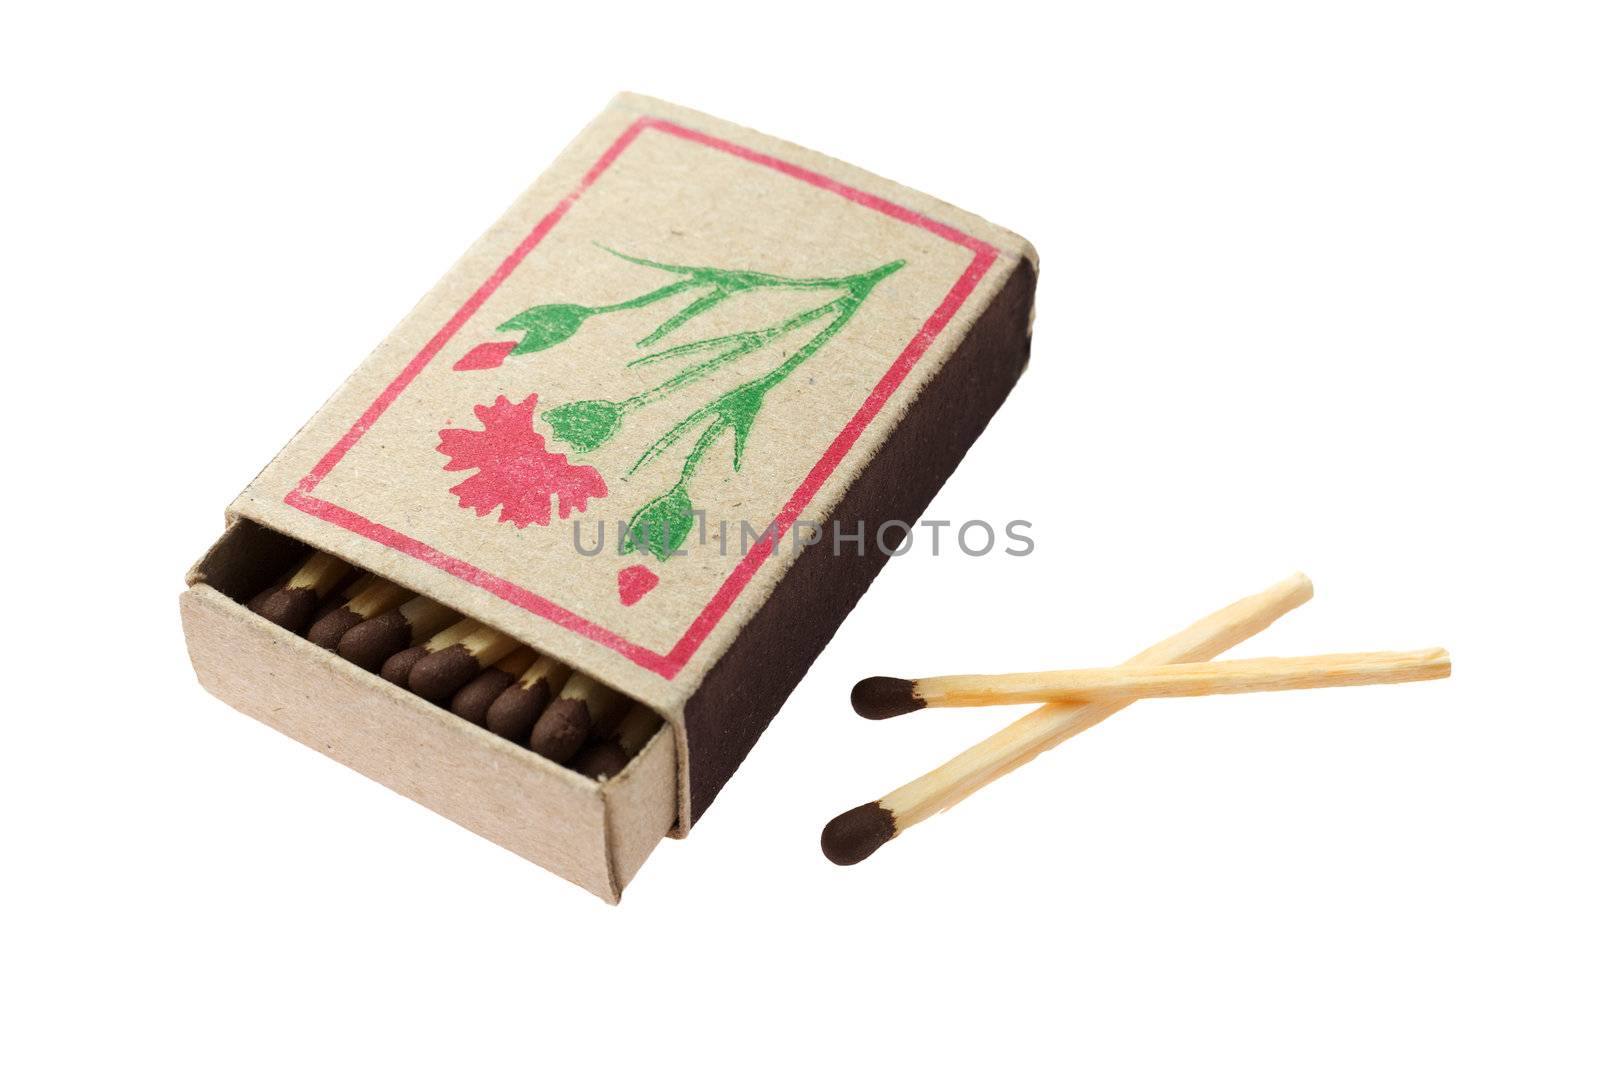 Boxes of matches on a white background